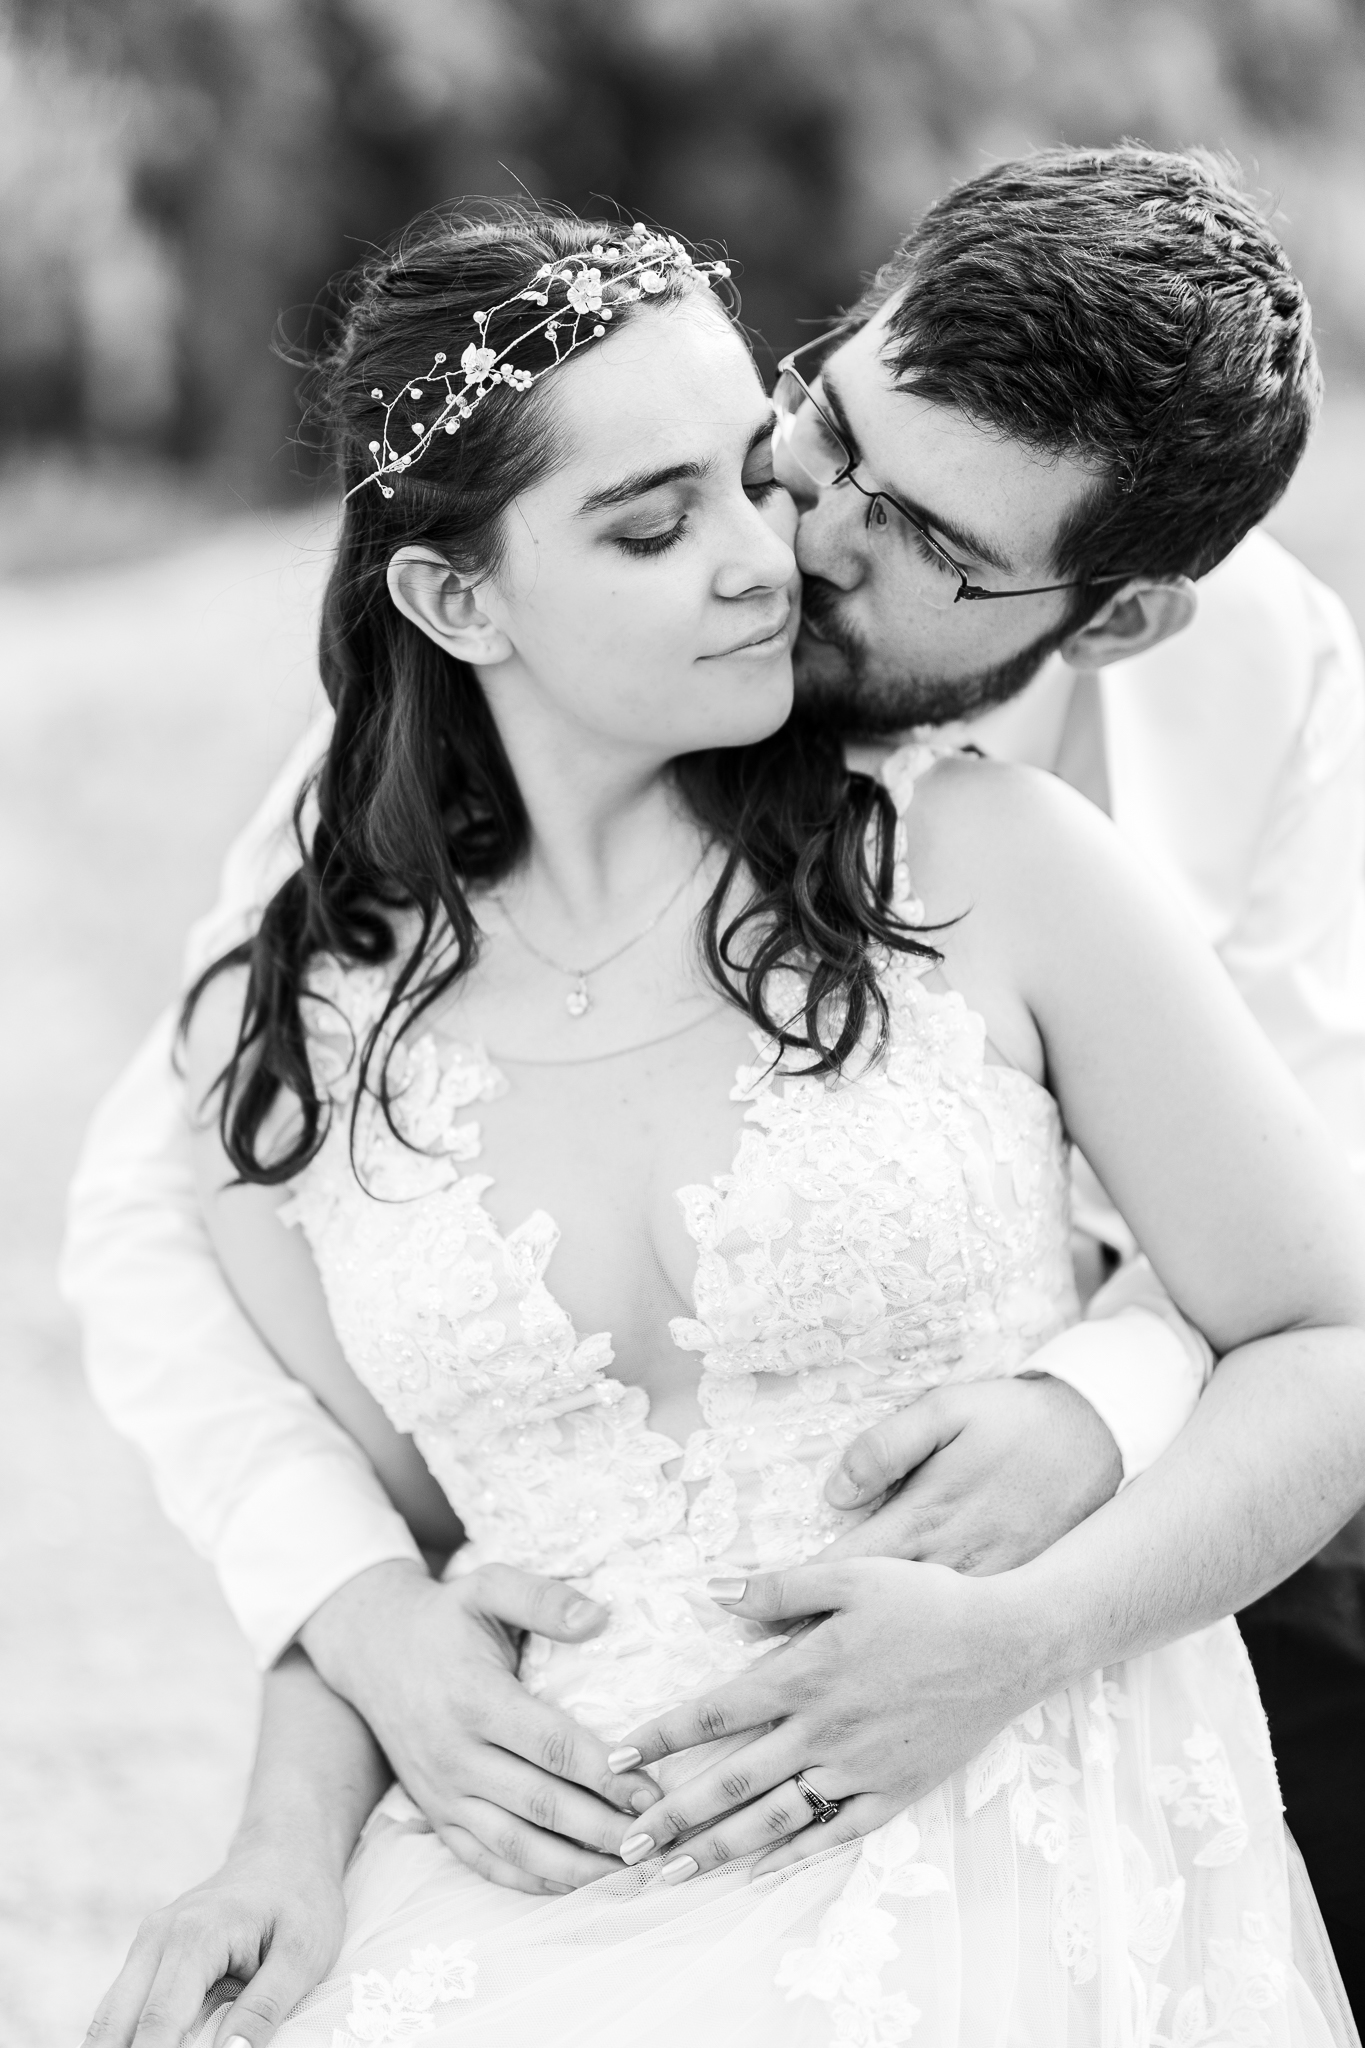 Black and White Image, Bride and Groom